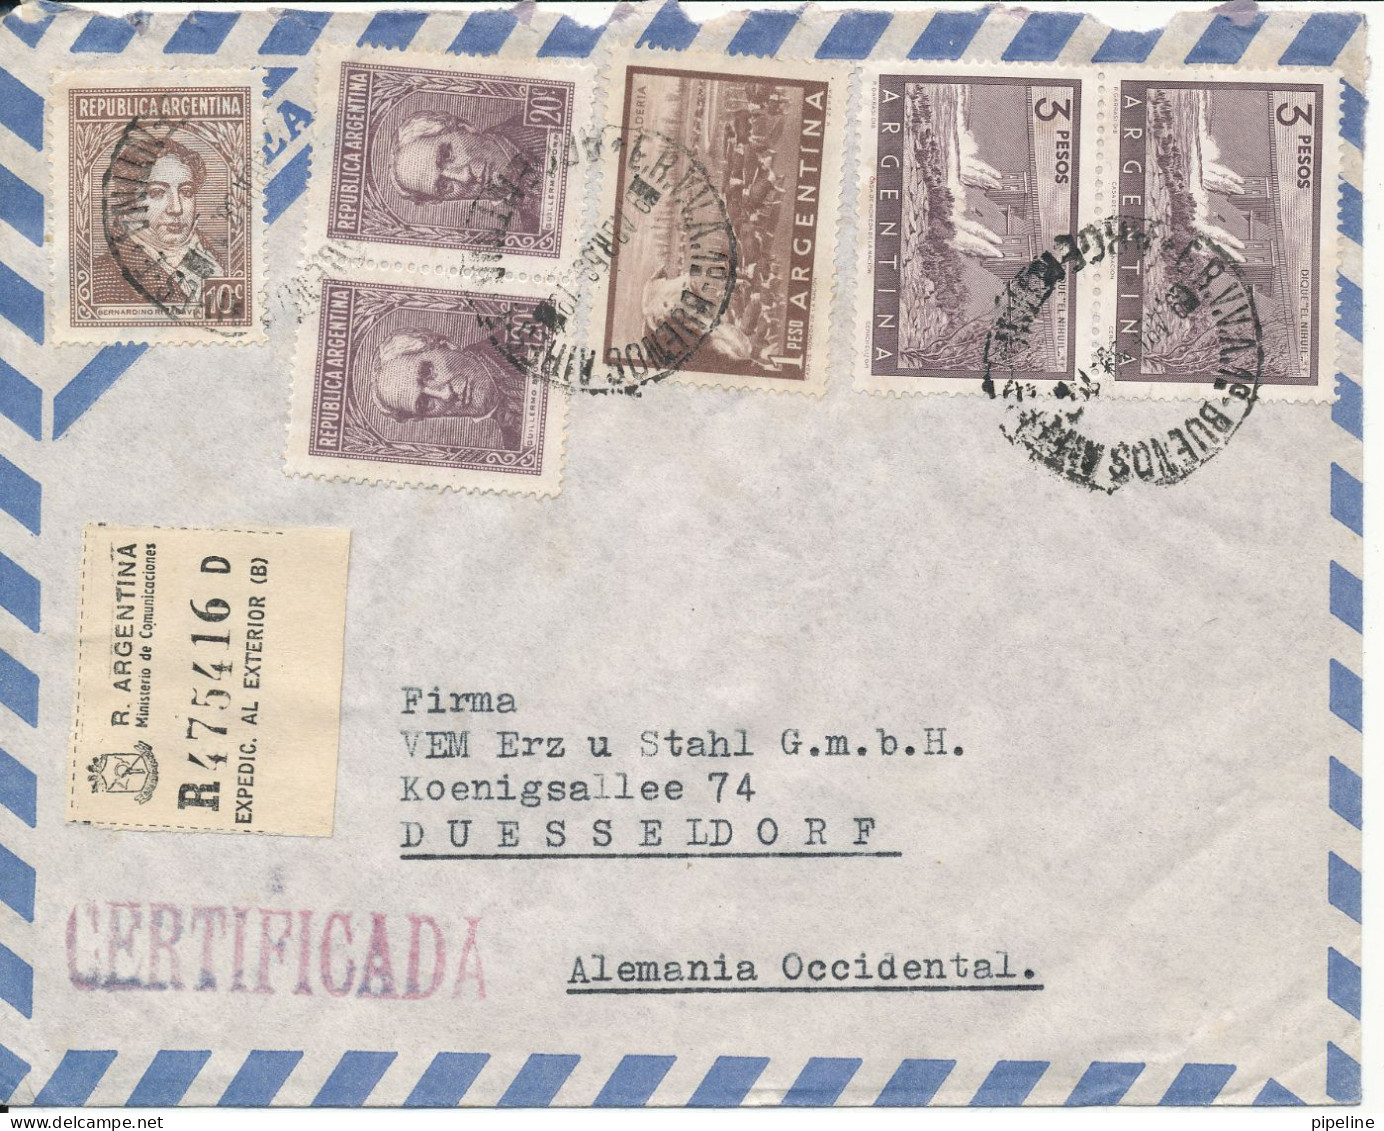 Argentina Registered Air Mail Cover Sent To Germany 9-4-1956 With More Stamps - Posta Aerea